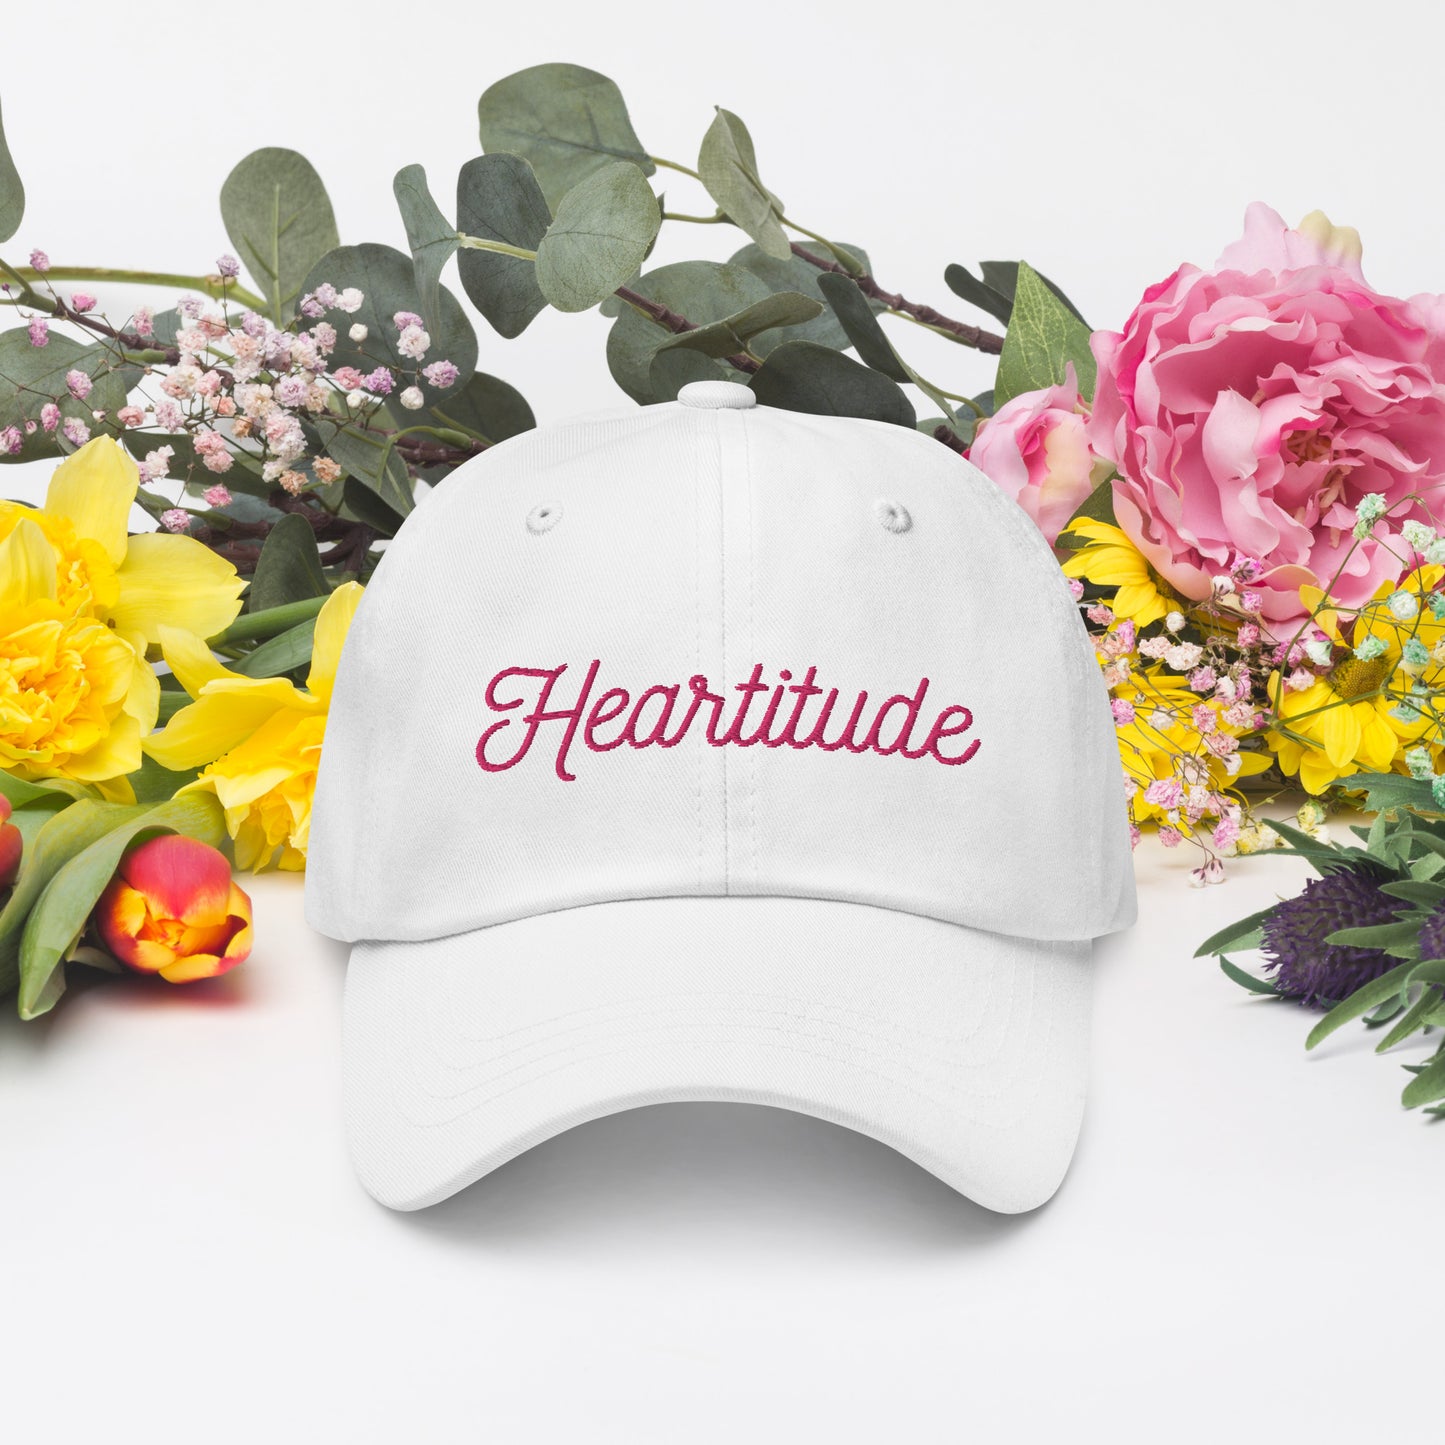 Woman with Heartitude Hat (50% to charity)